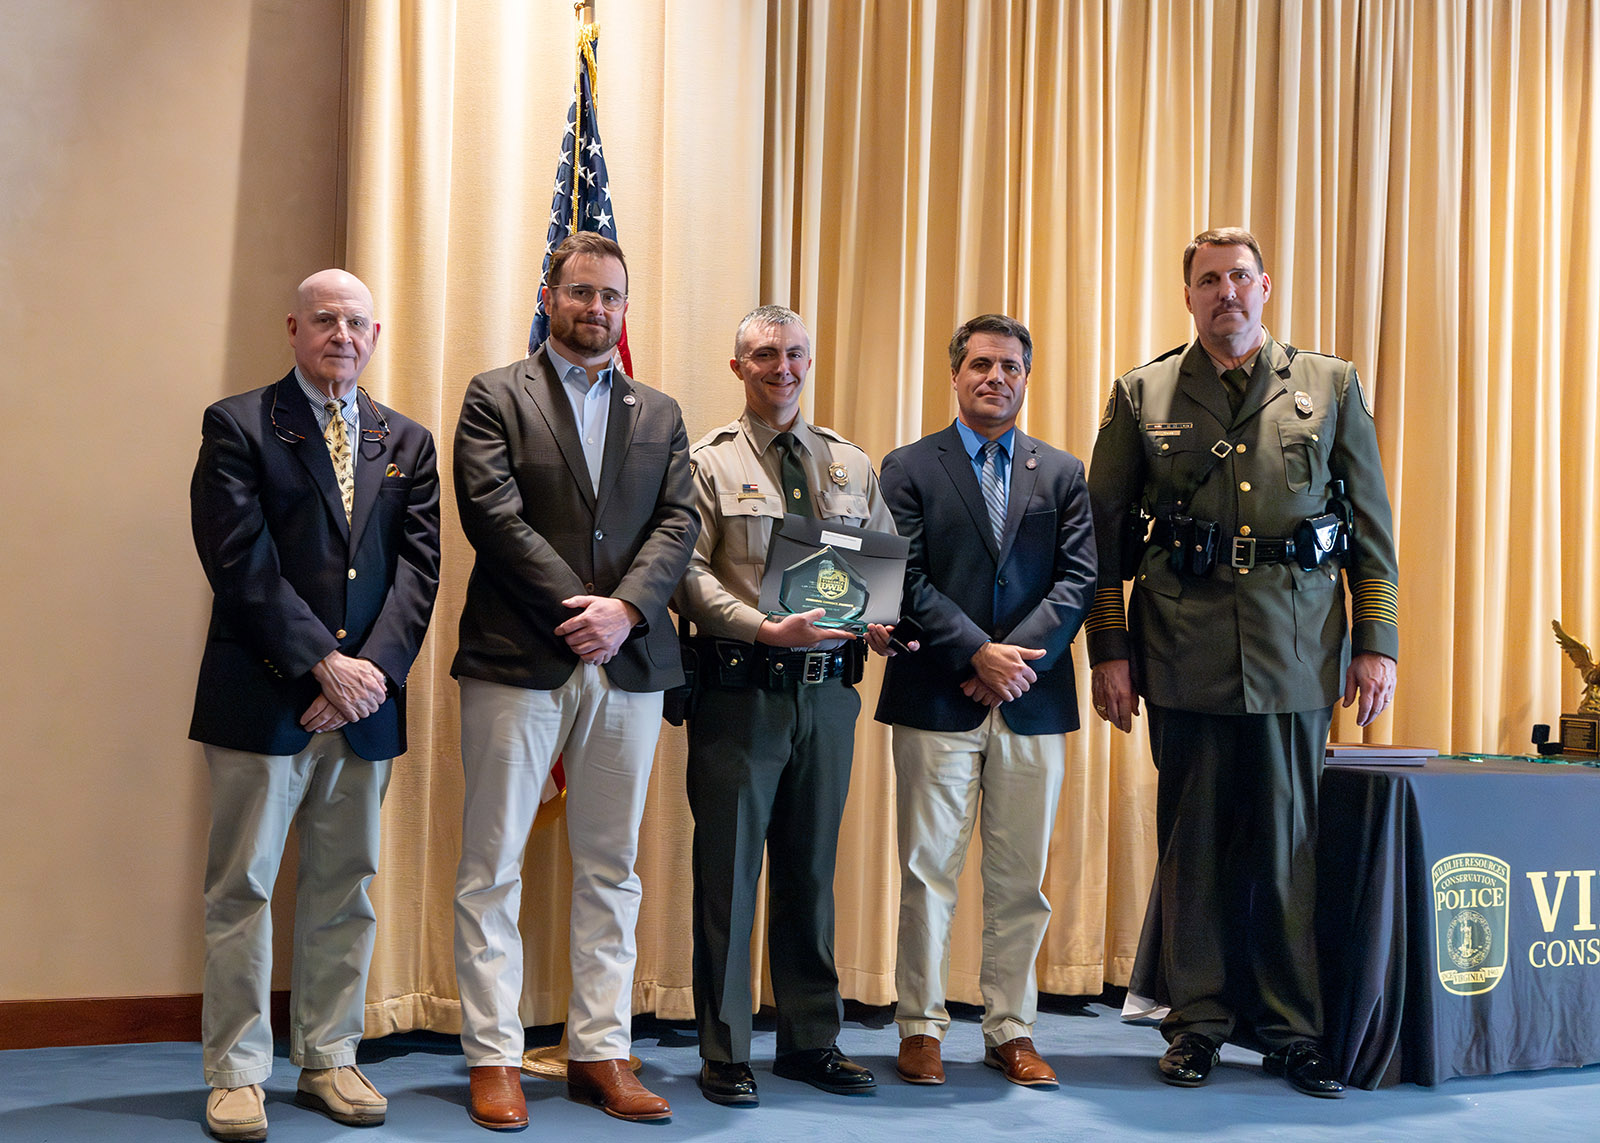 A photo of five men standing on a stage, with the man in the center in Conservation Police uniform and holding a plaque. 